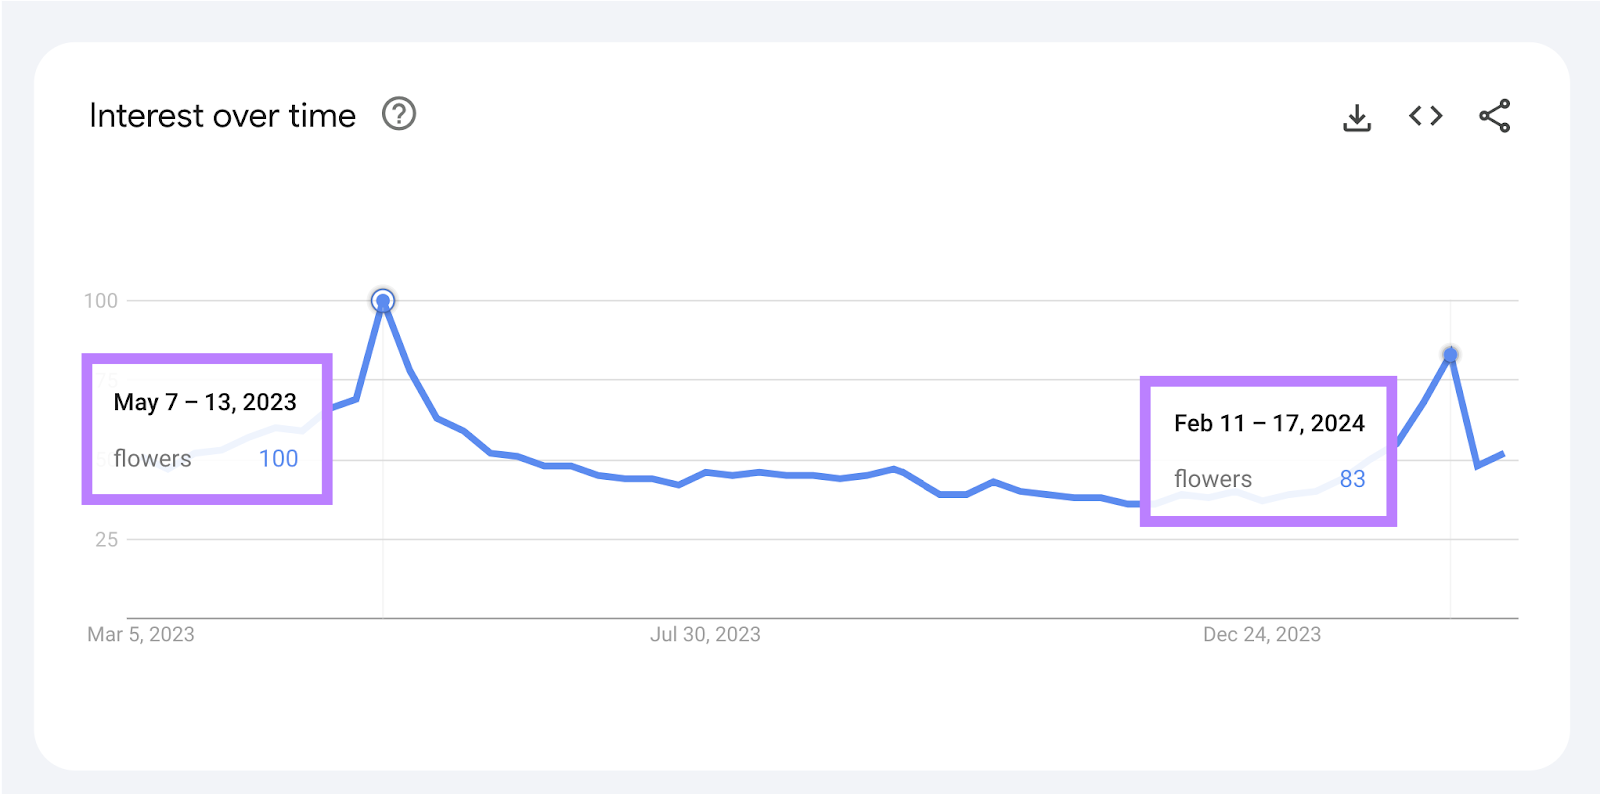 Google Trends "interest implicit    time" graph for "flowers" shows a seasonal spike earlier  Valentine’s Day and Mother’s Day